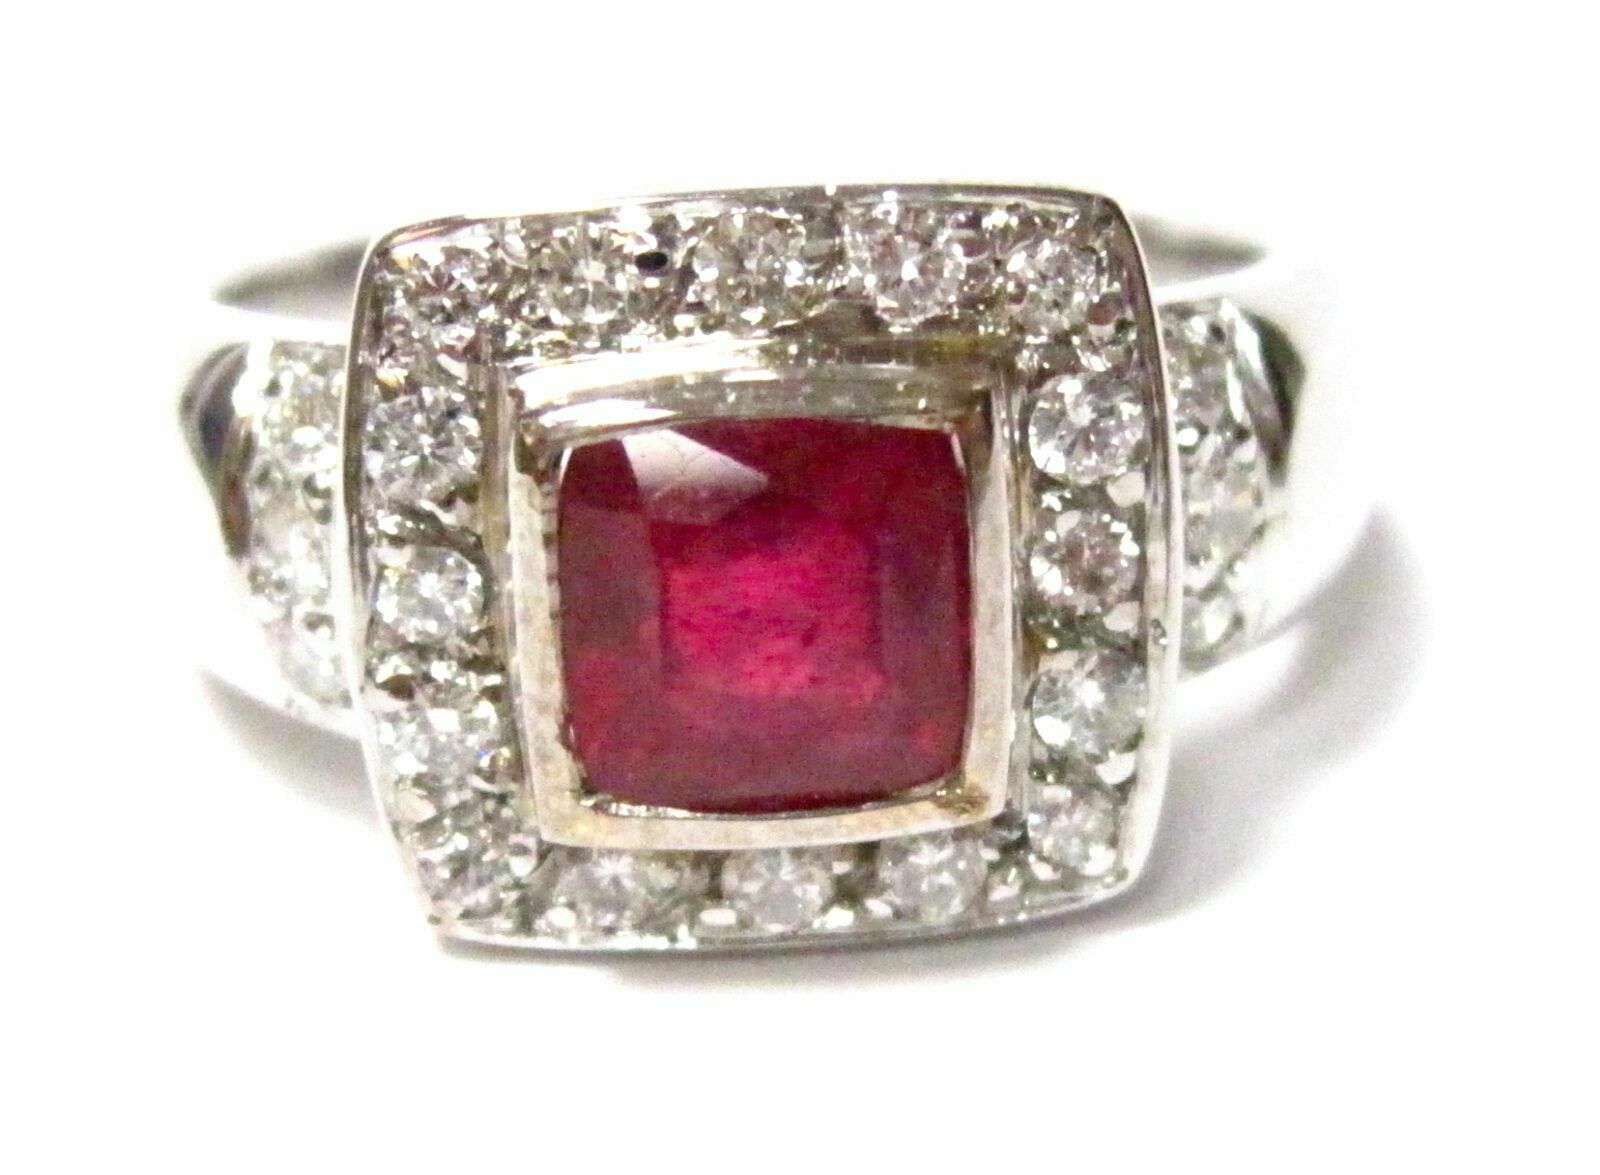 2.52 TCW Cushion Cut Ruby & Diamond Accents Solitaire Ring Size 8 14k White Gold